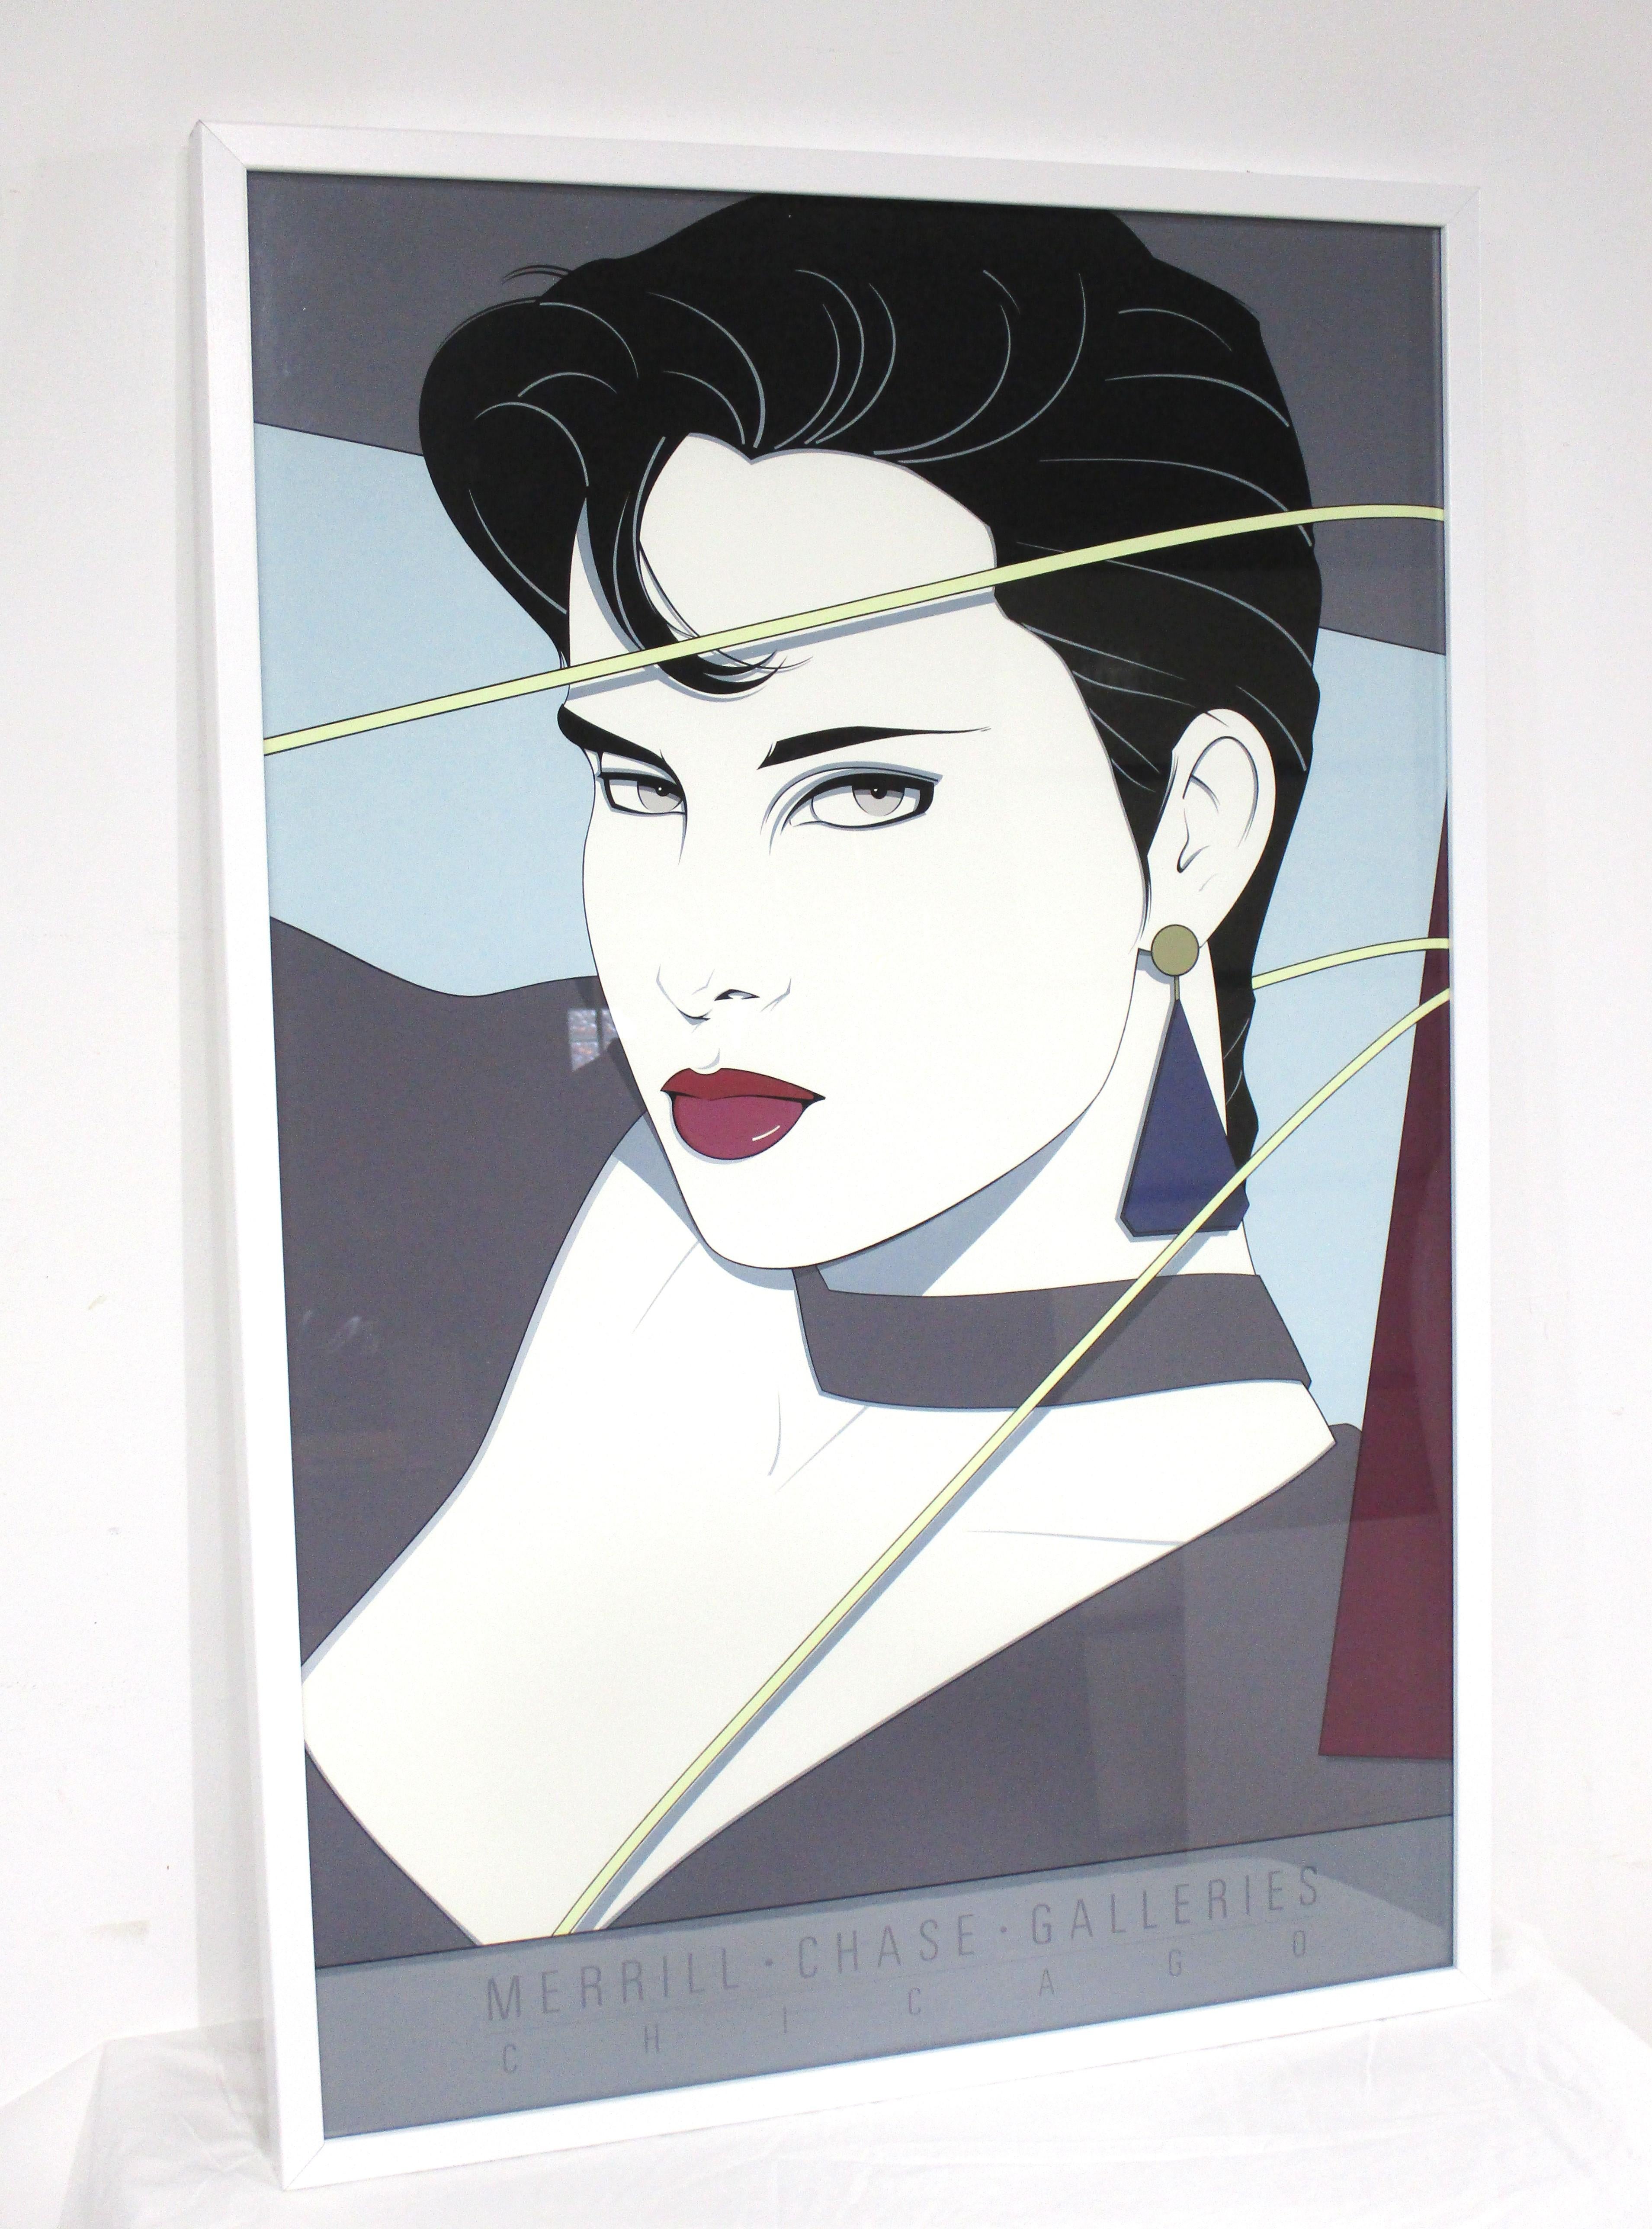 Paper 80's Patrick Nagel Merrill Chase Gallery Chicago Silkscreen Print  For Sale